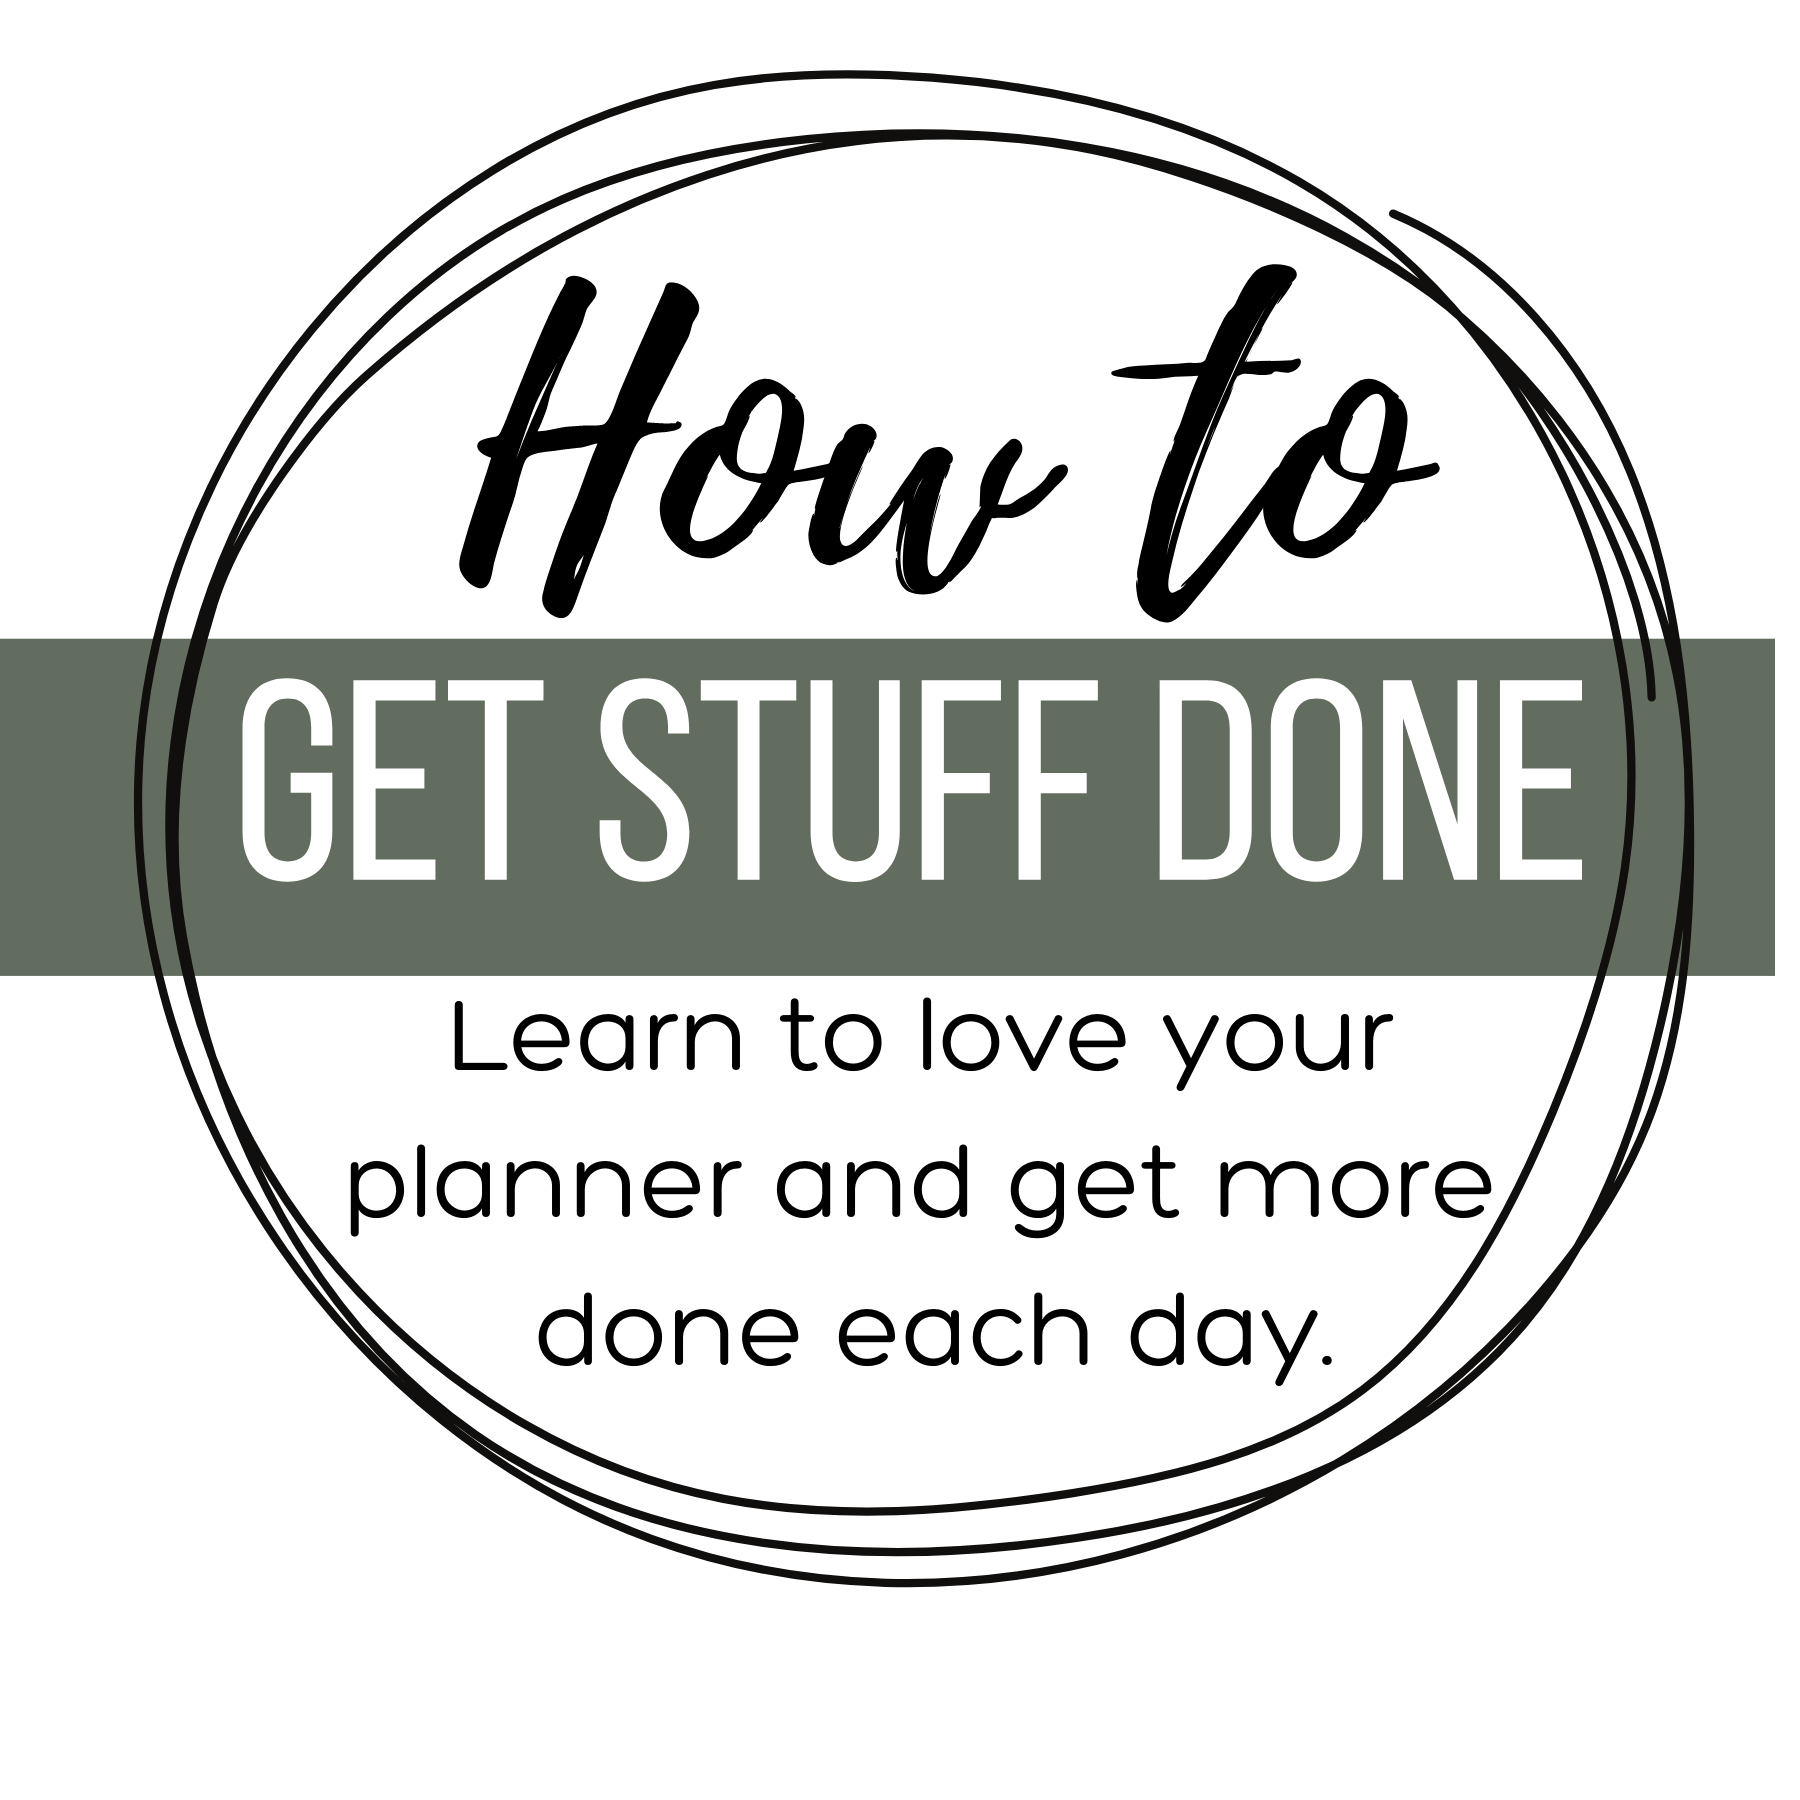 How to get stuff done